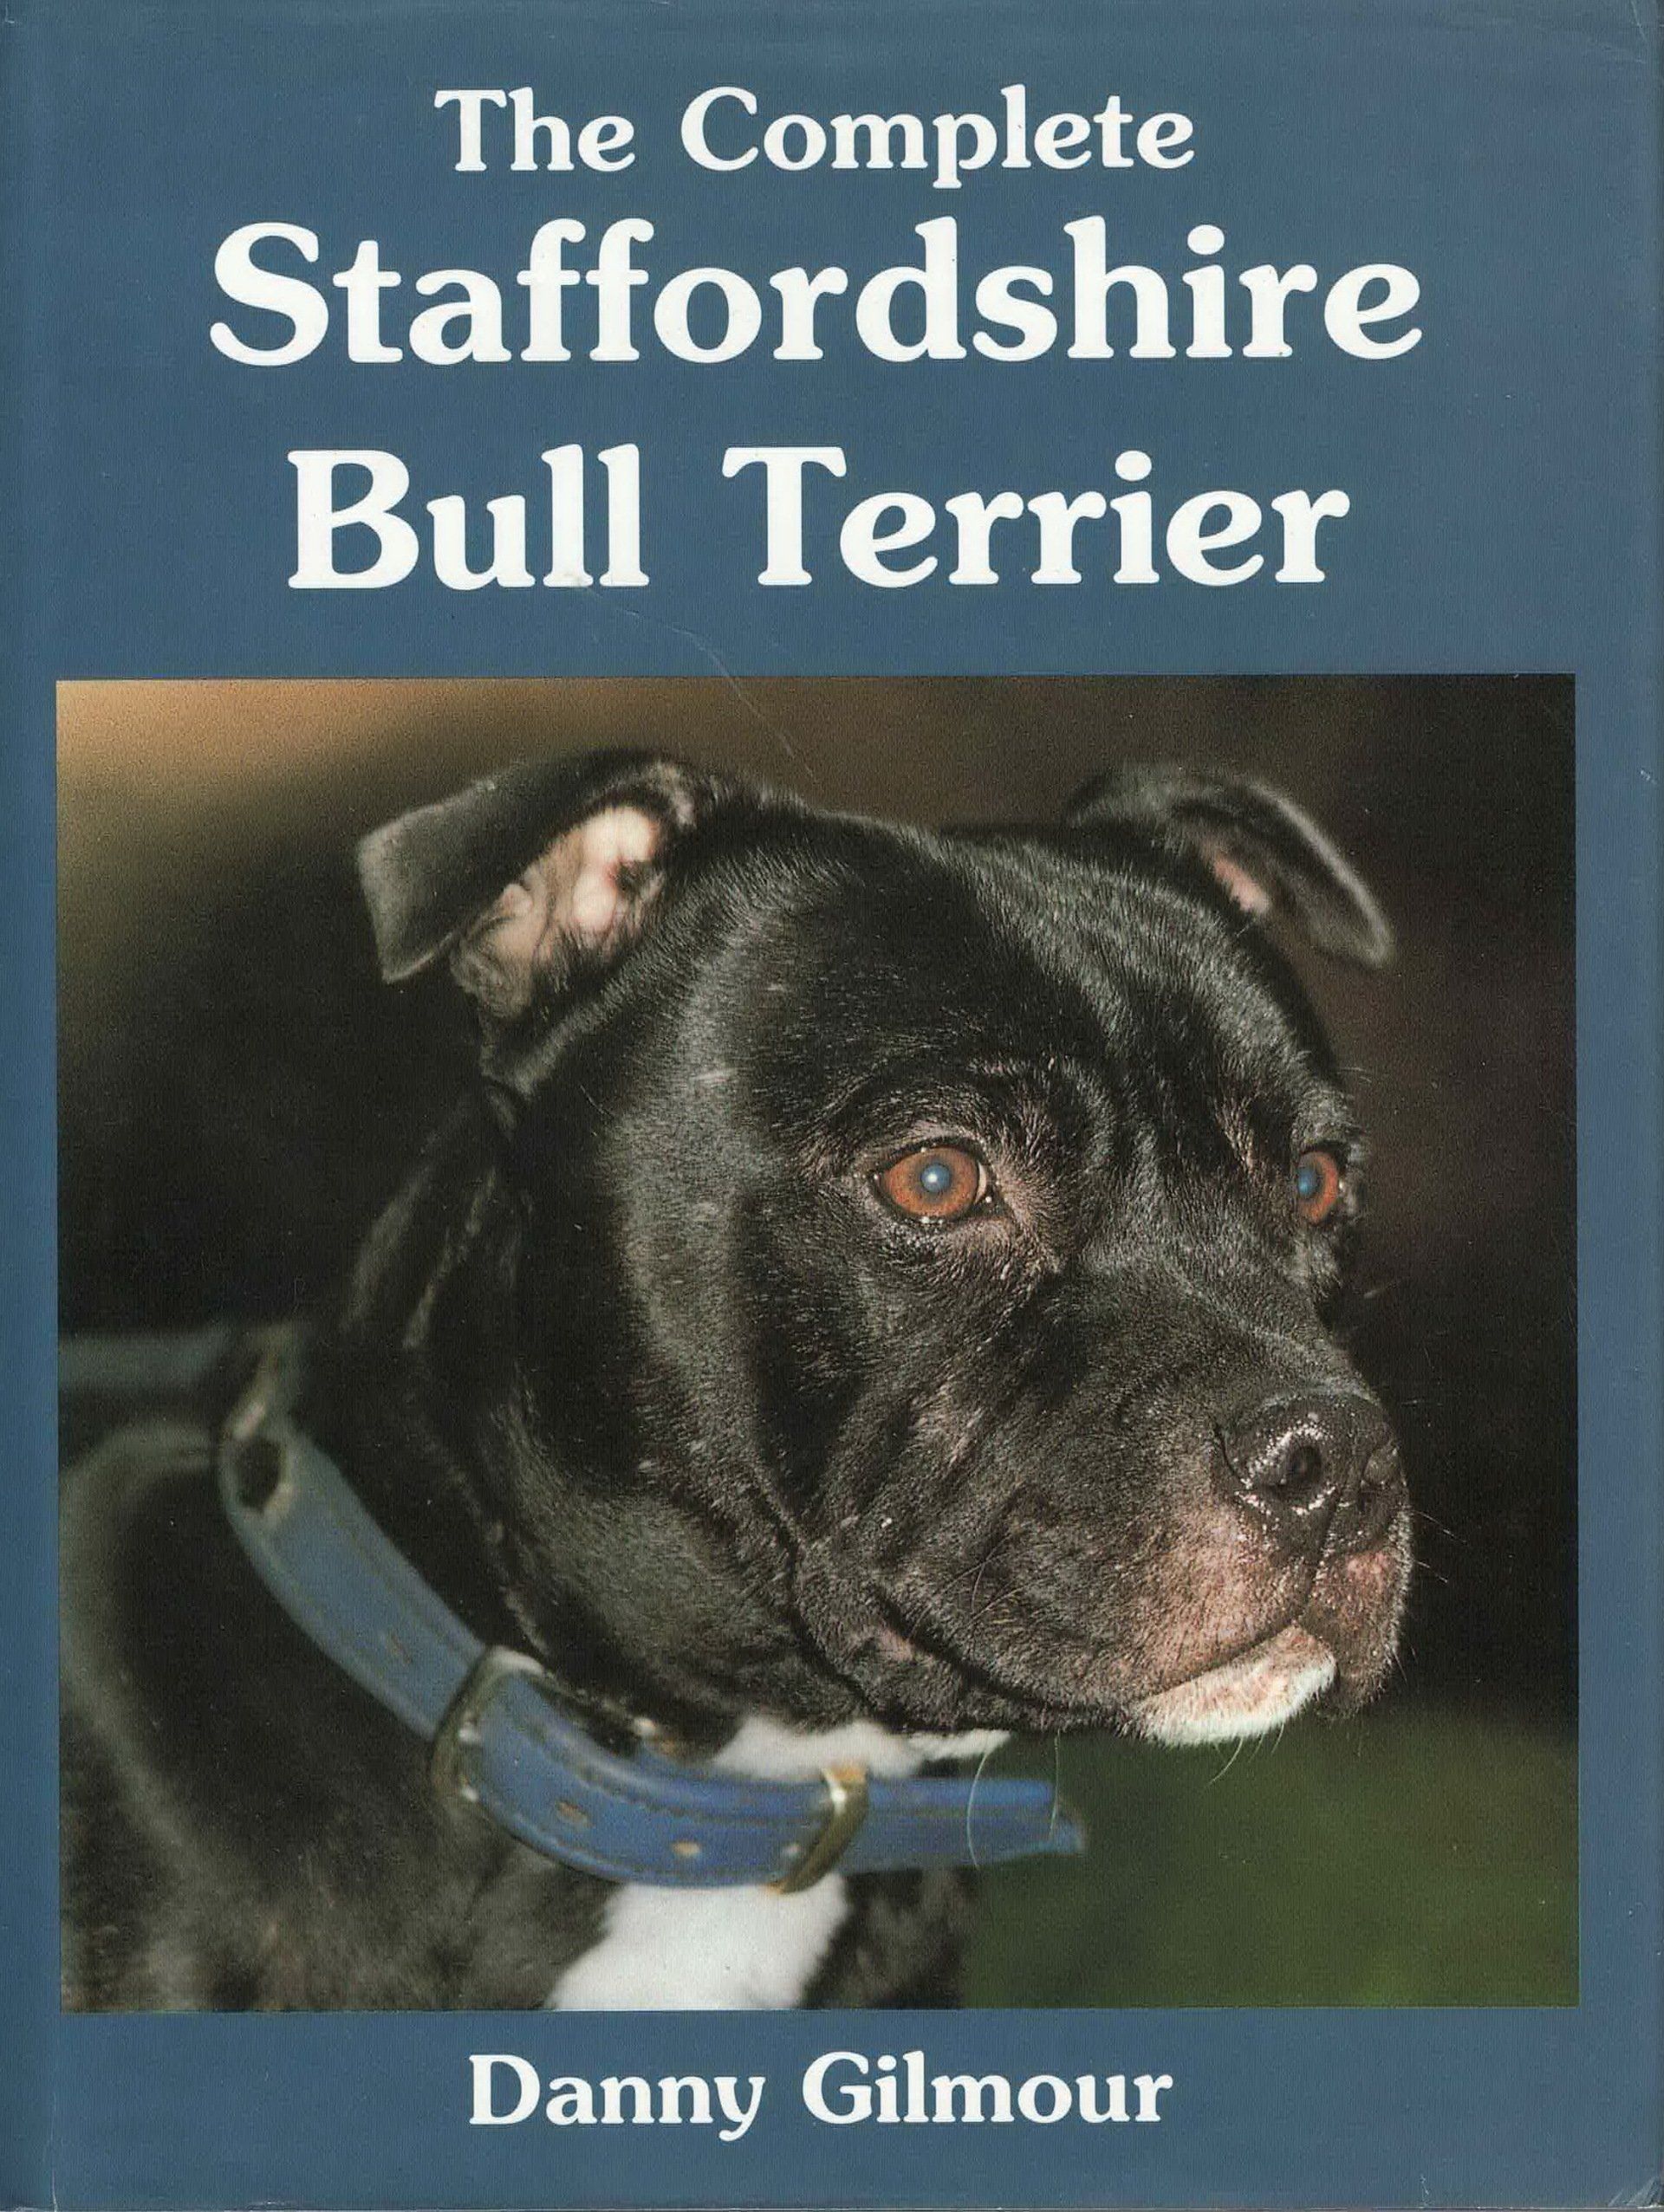 The Complete Staffordshire Bull Terrier by Danny Gilmour